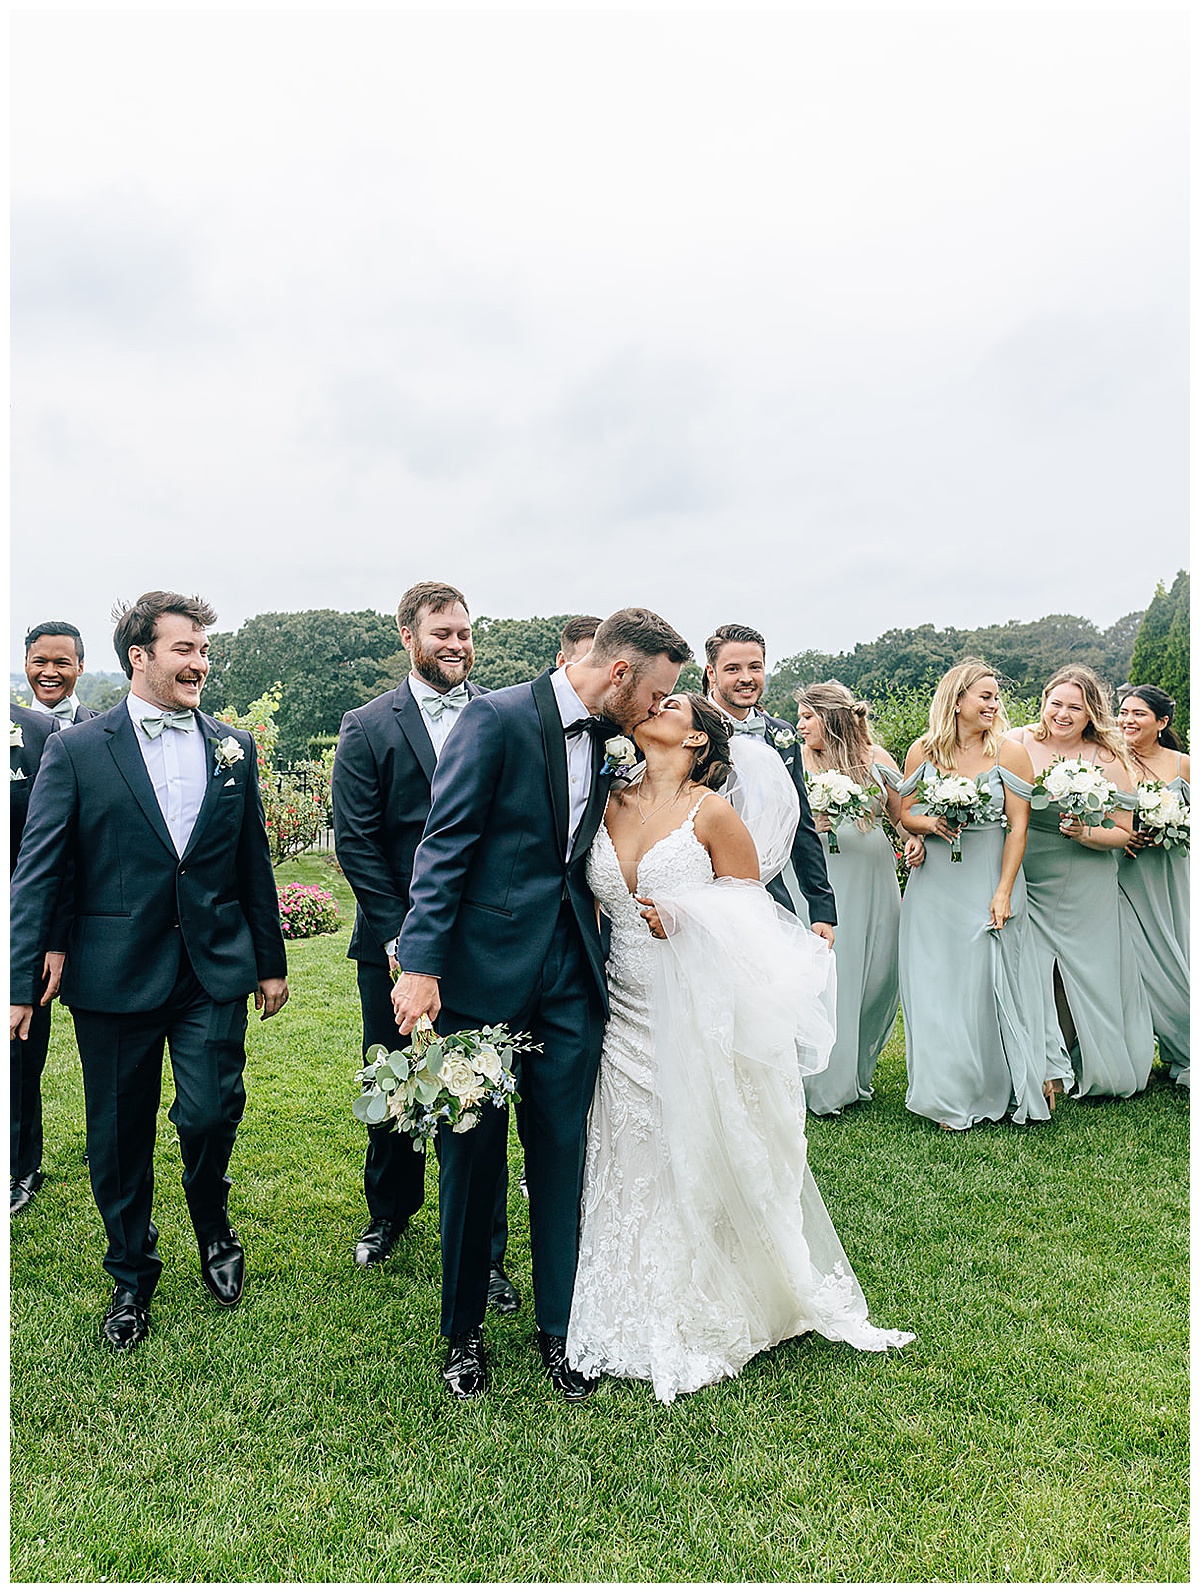 Couple walk together in front of family and friends for Detroit Wedding Photographer